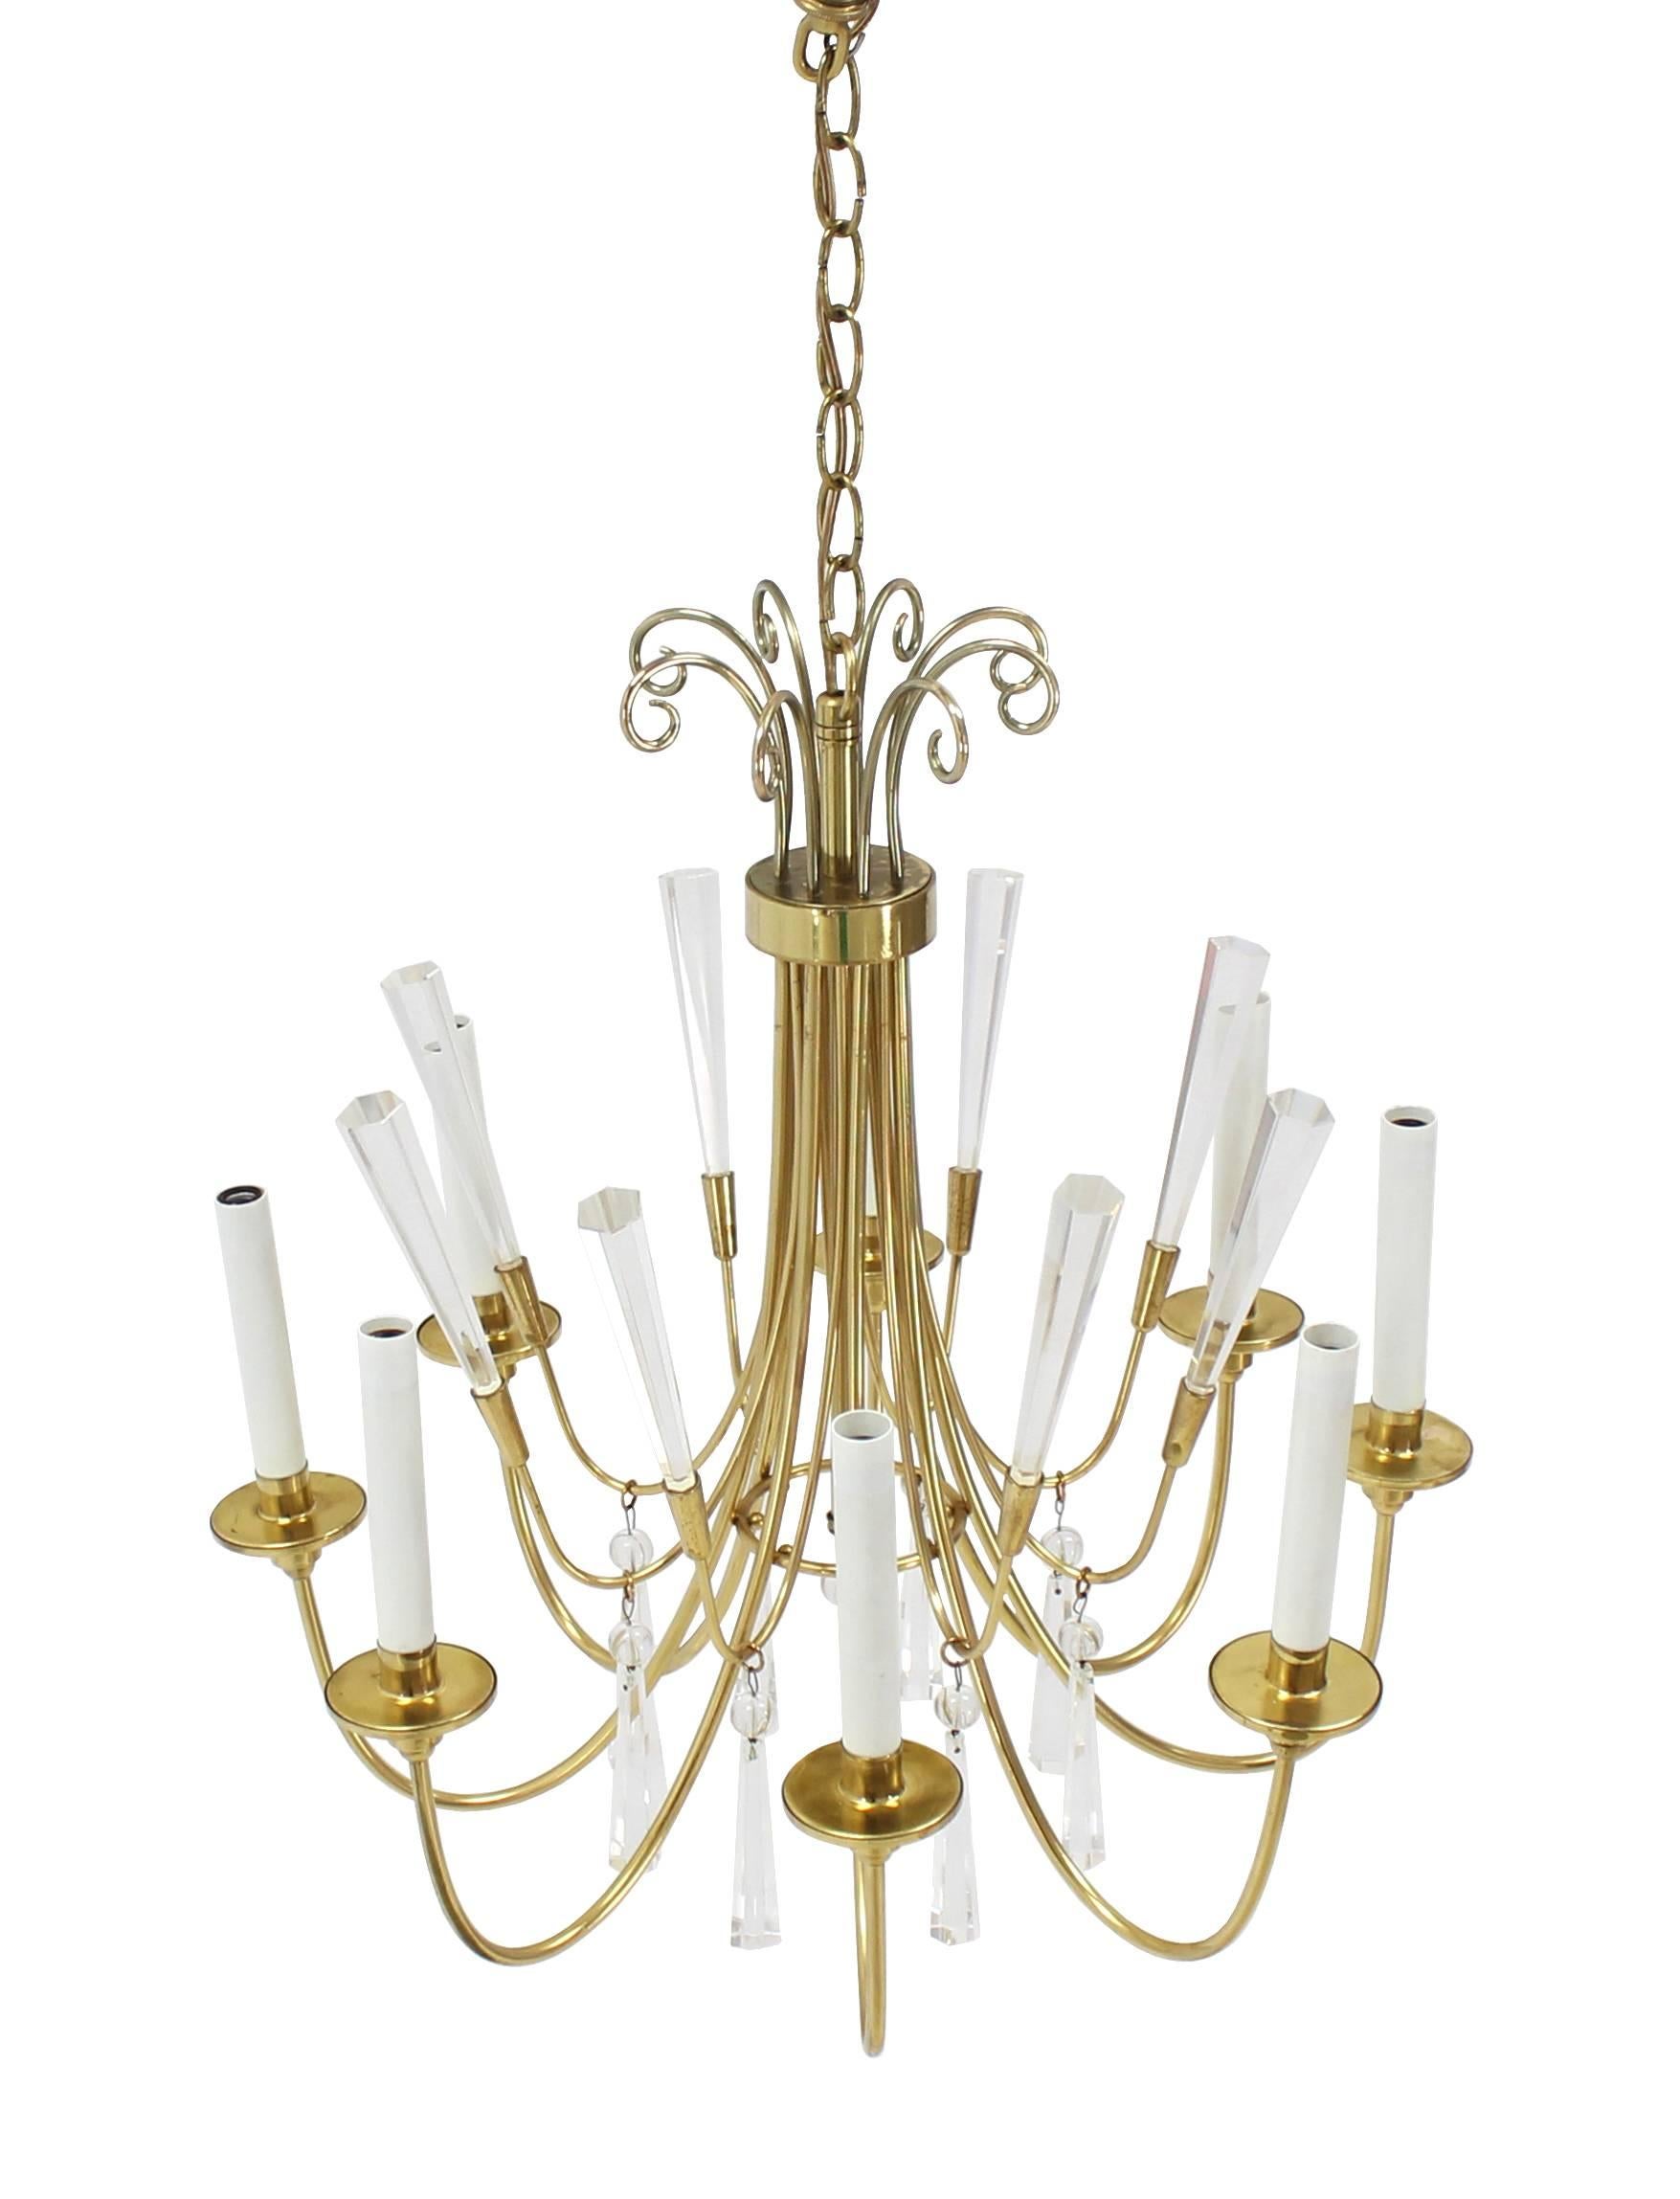 20th Century Brass and Lucite Mid-Century Modern Light Fixture Chandelier  For Sale